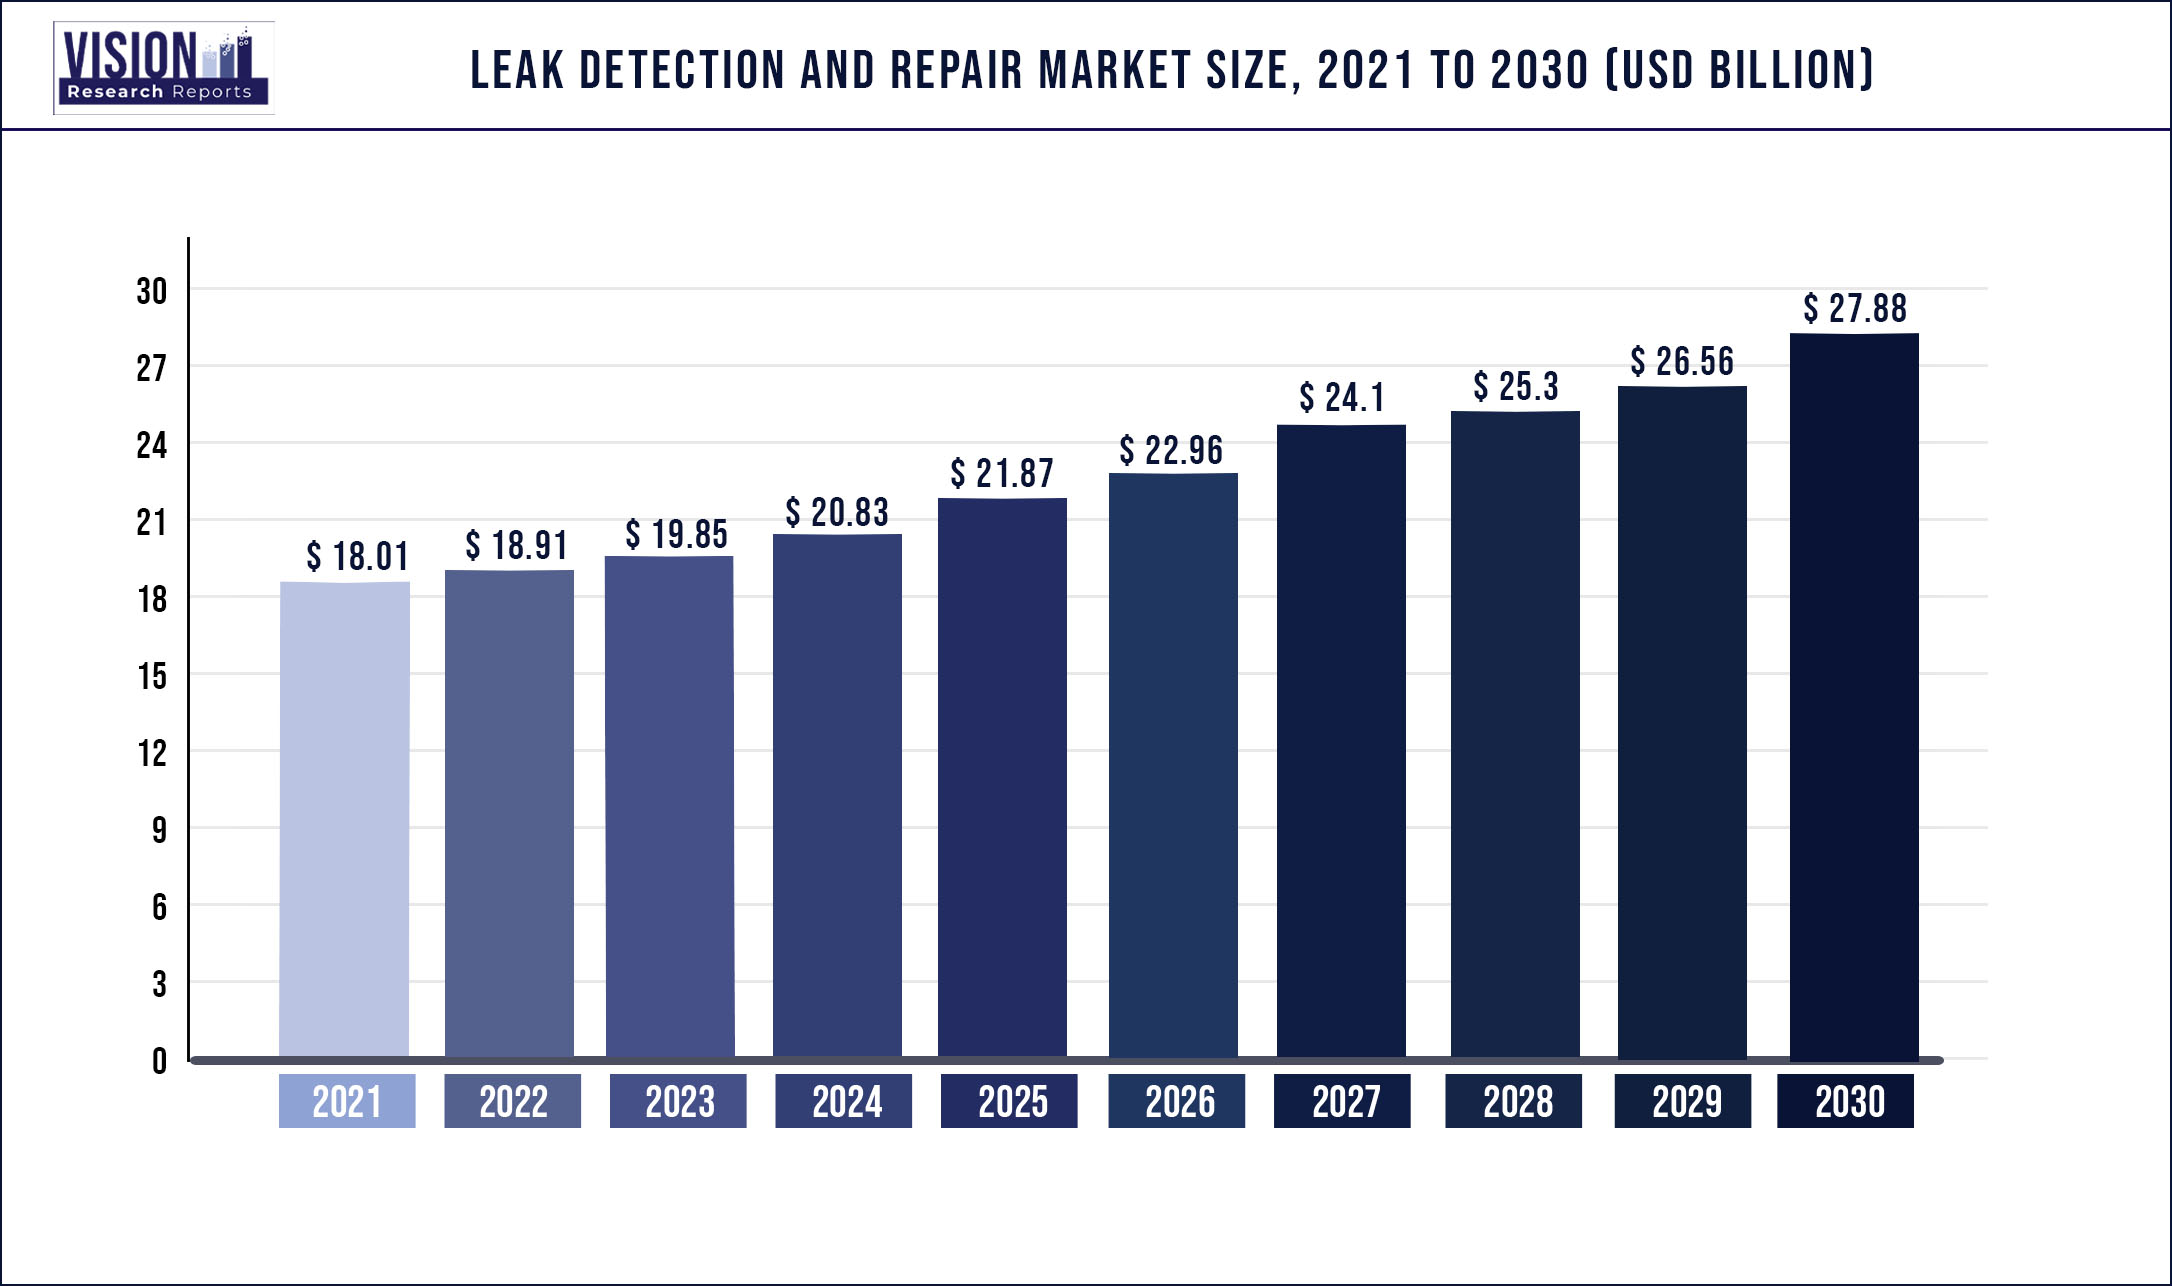 Leak Detection And Repair Market Size 2021 to 2030